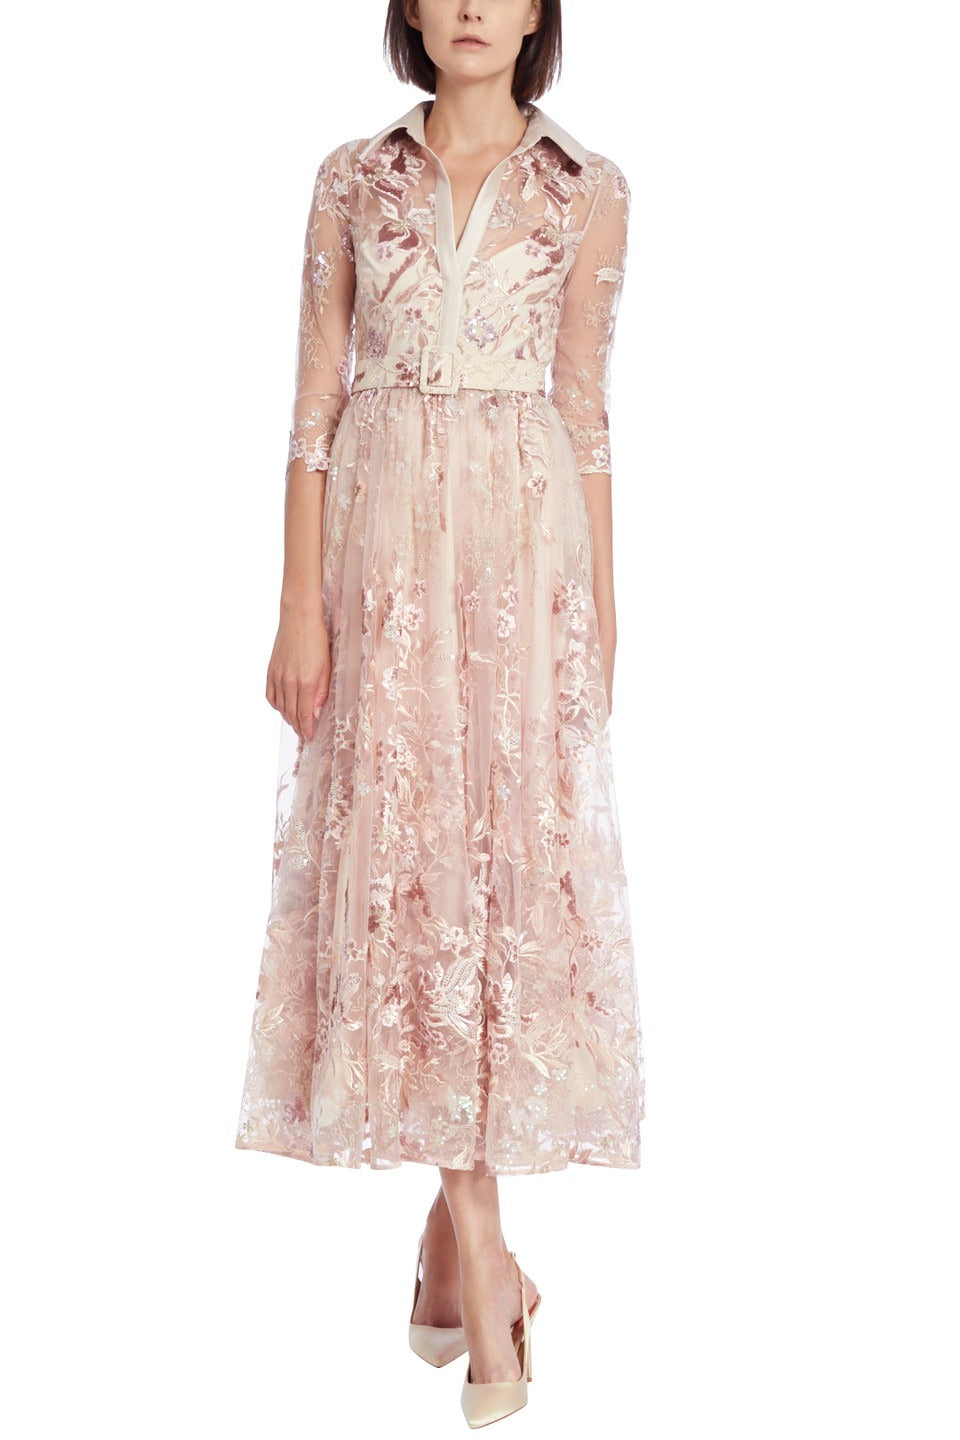 Badgley Mischka Floral Embroidered Tulle Cocktail Dress in Primrose